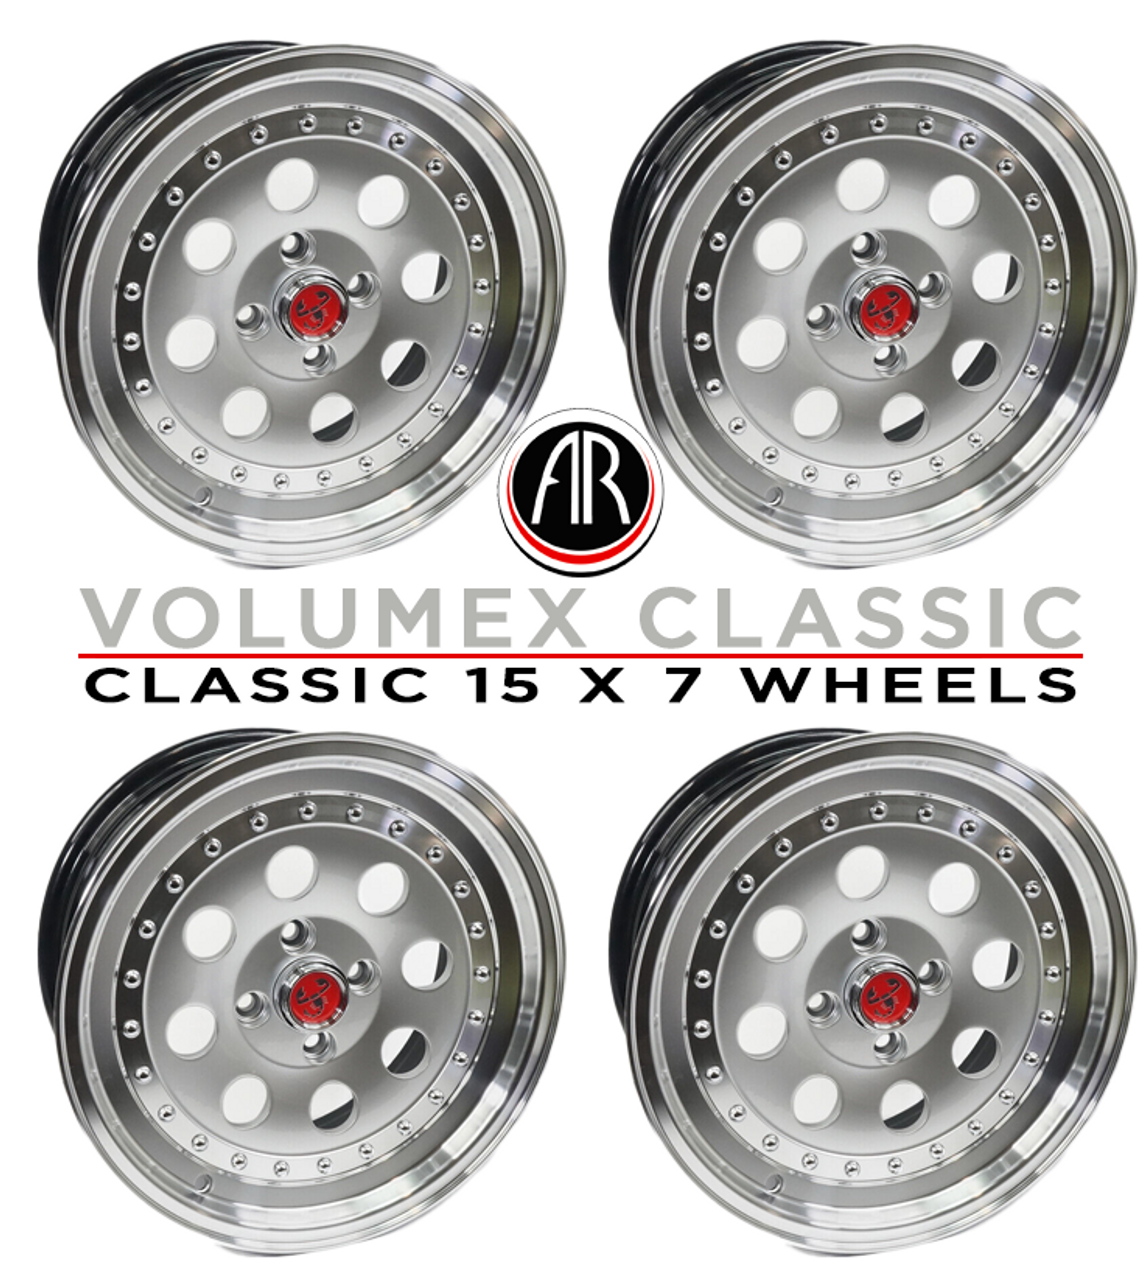 Volumex style wheels - 15" x 7", 15mm offset - SET of FOUR
FIAT 124 Spider, Spider 2000 and Pininfarina 1966-1985

FIAT 124 Sport Coupe - 1967-1975
All 2012-on FIAT 500 and 500 Abarth models
 - Auto Ricambi
SU9-315